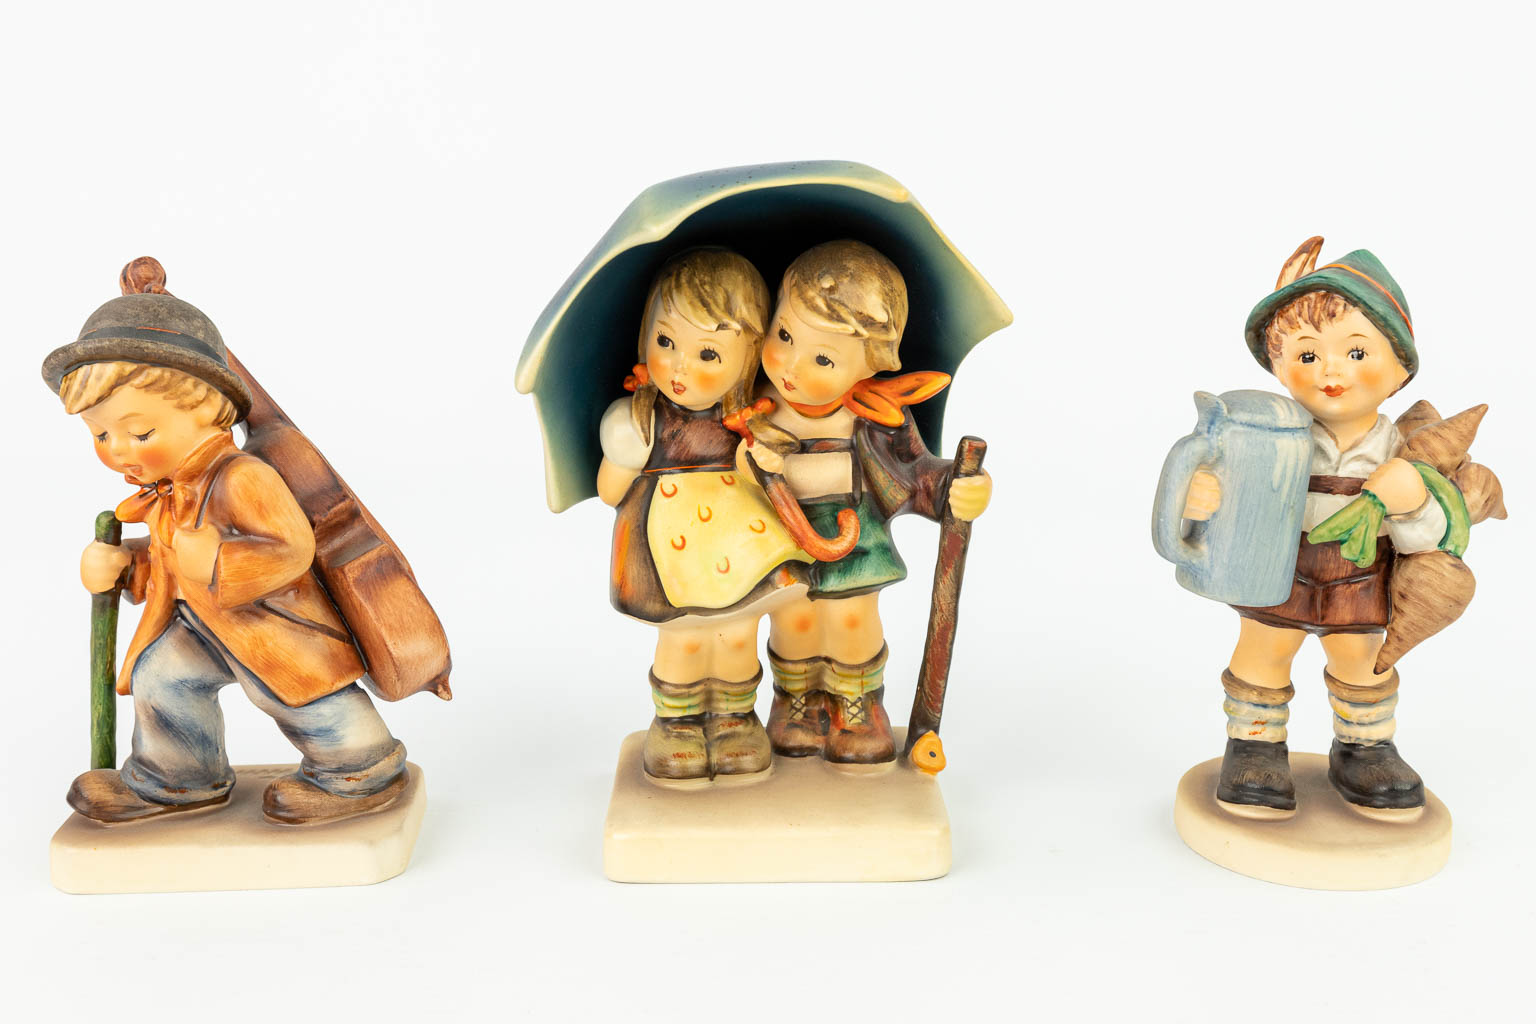 A collection of 6 Hummel statues: : 21/I, 188-1948, 71, 89/I, 2/I, made by Goebel in Germany. (H:21cm)